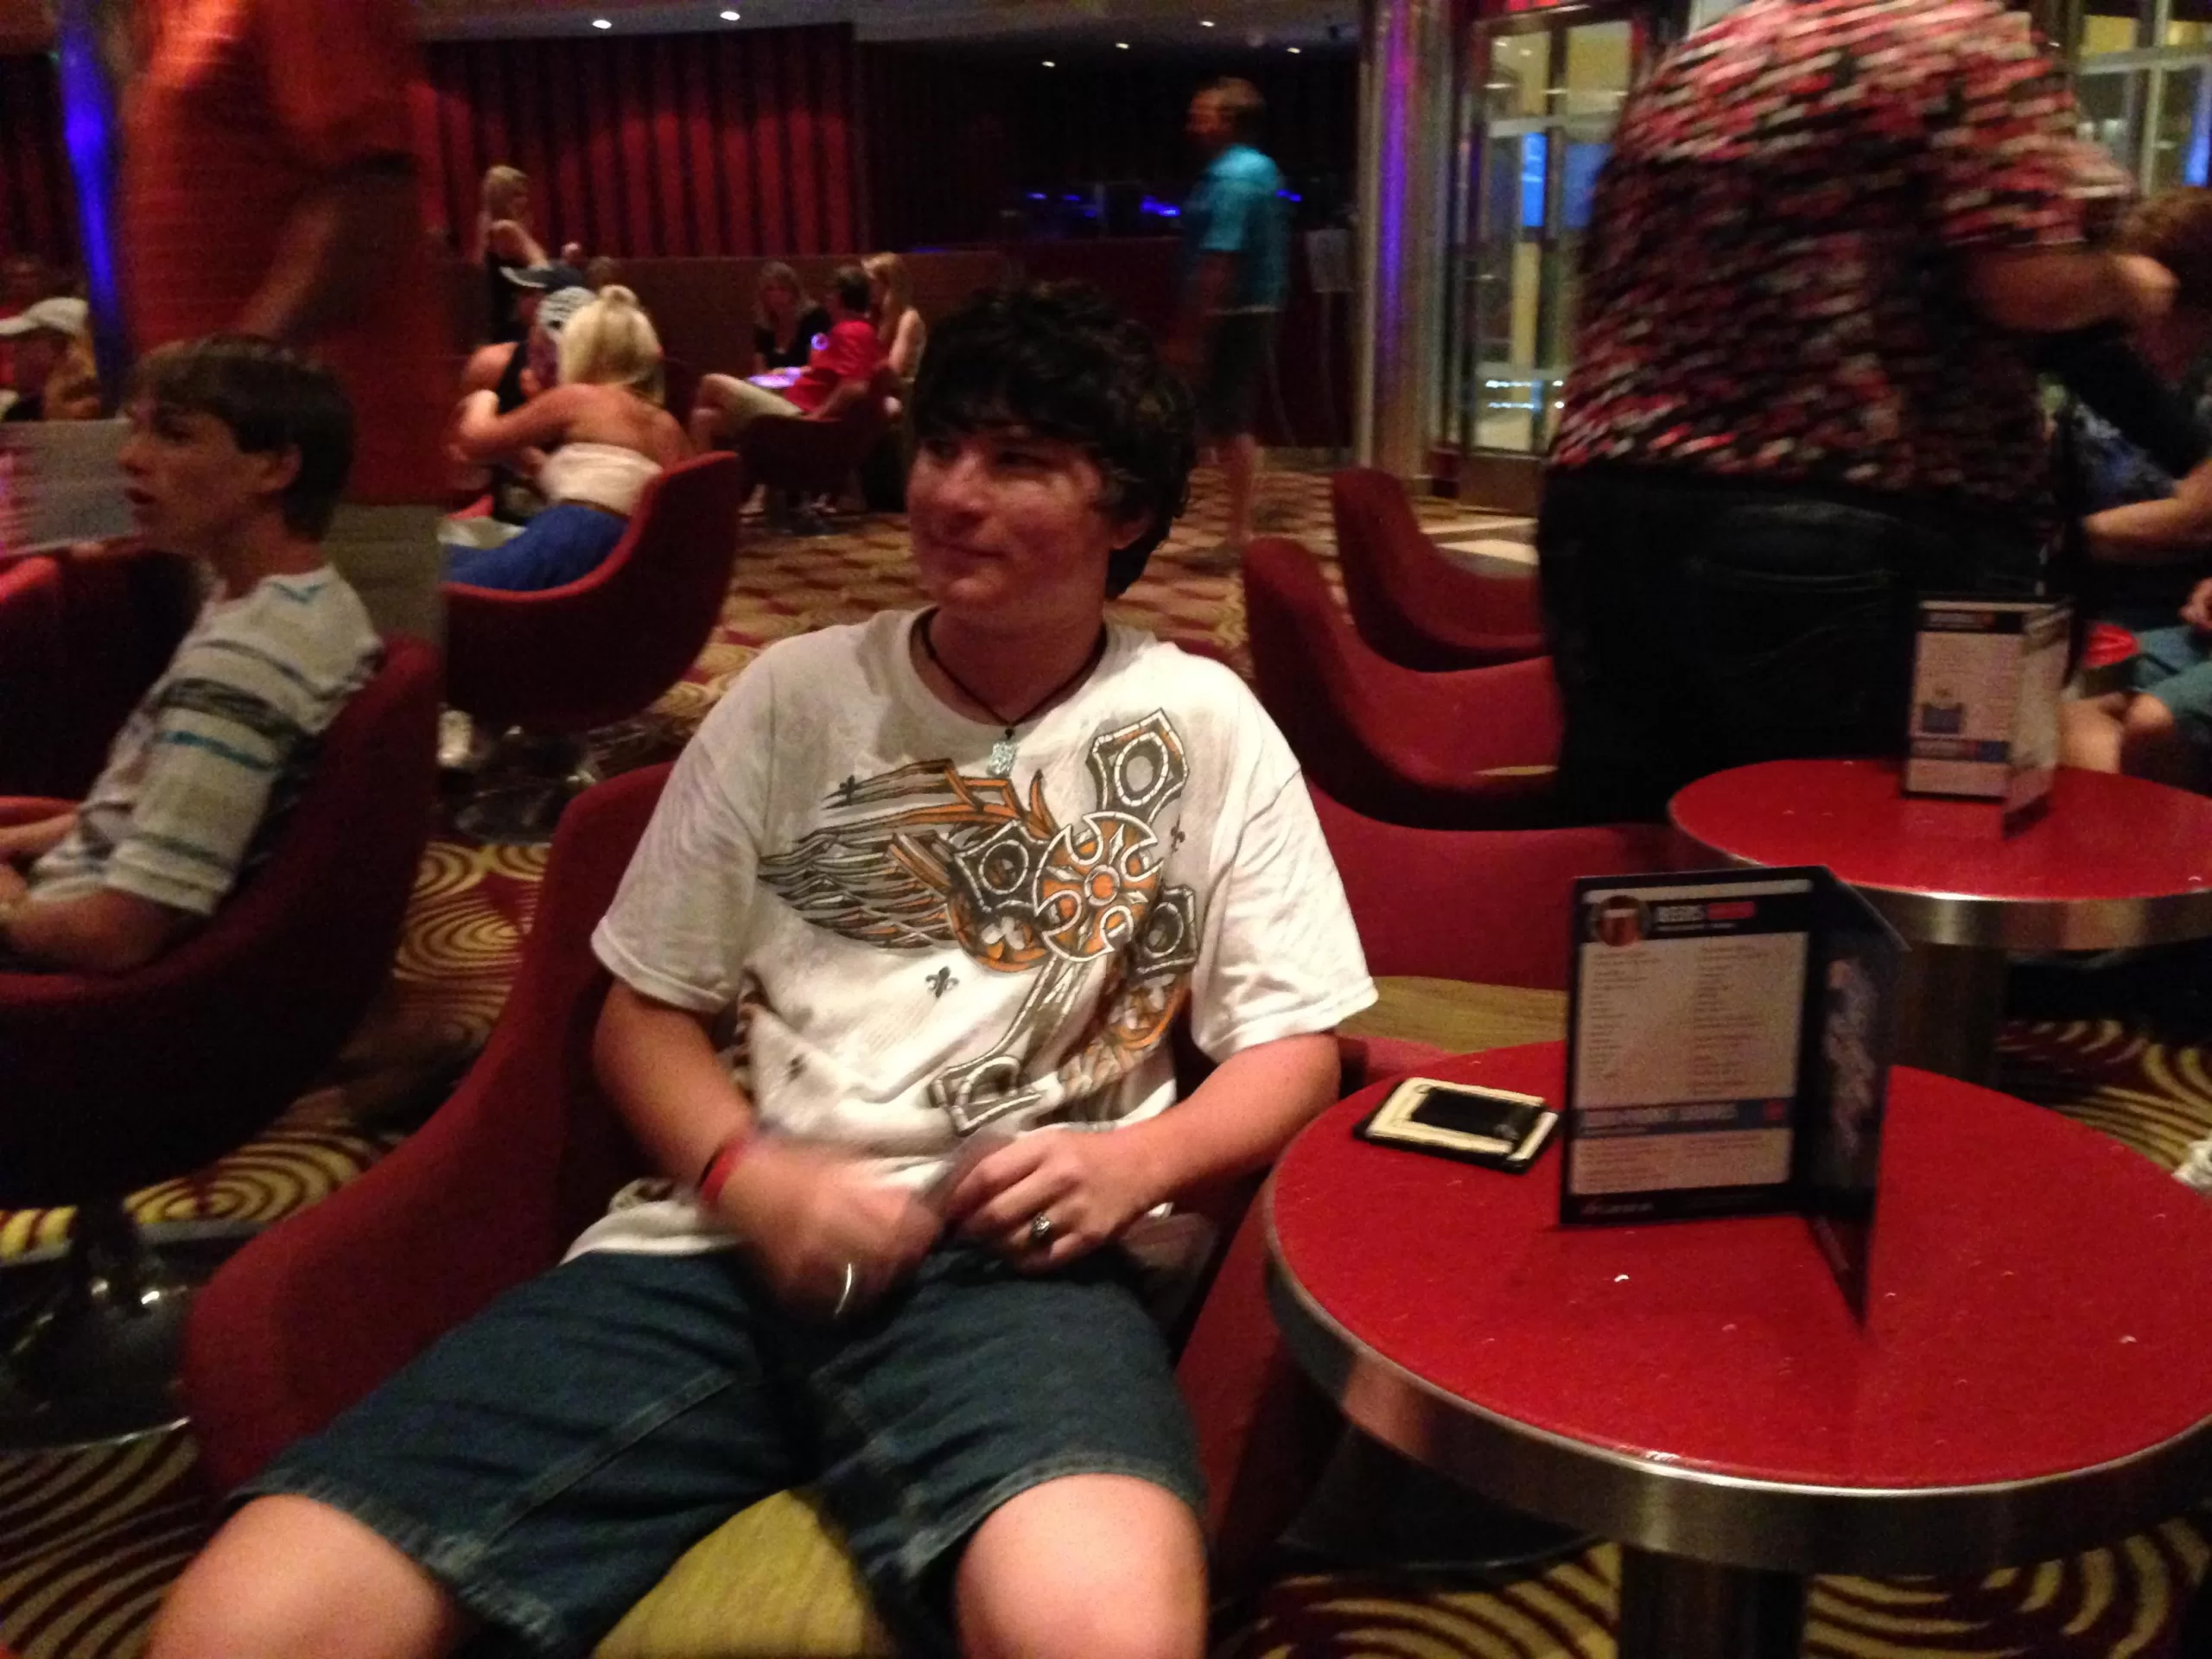 Entertainment on the Carnival Breeze